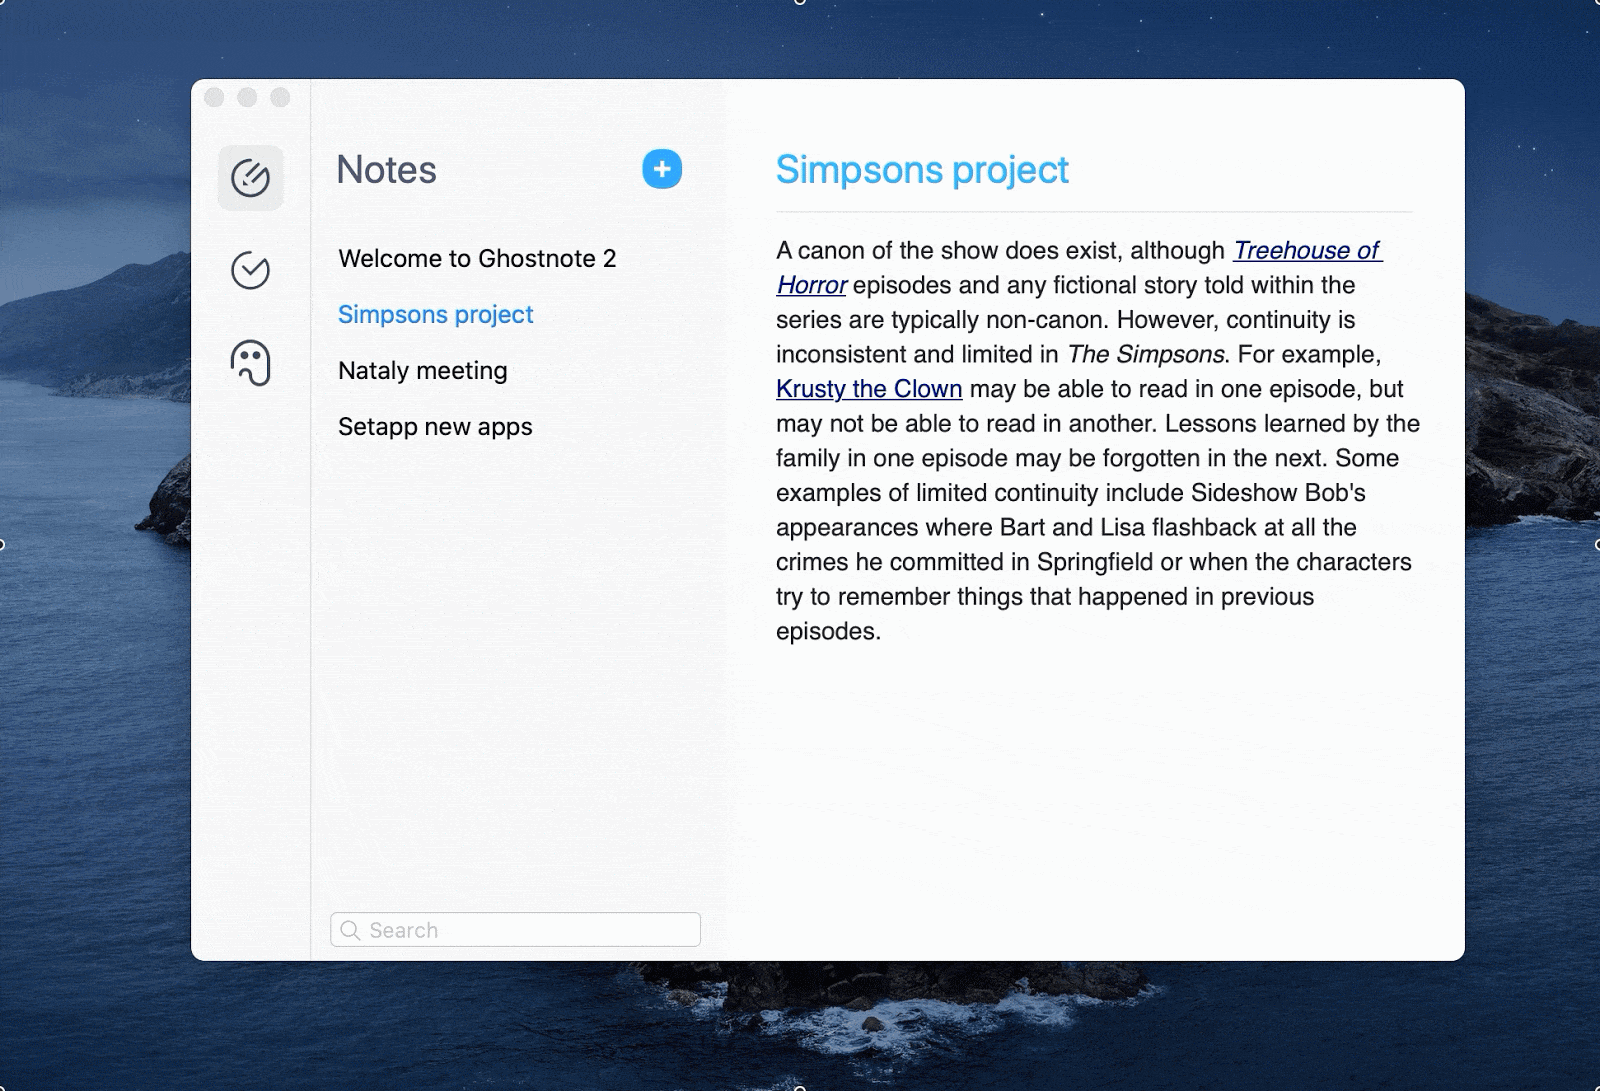 View all your notes in Ghostnote's note browser